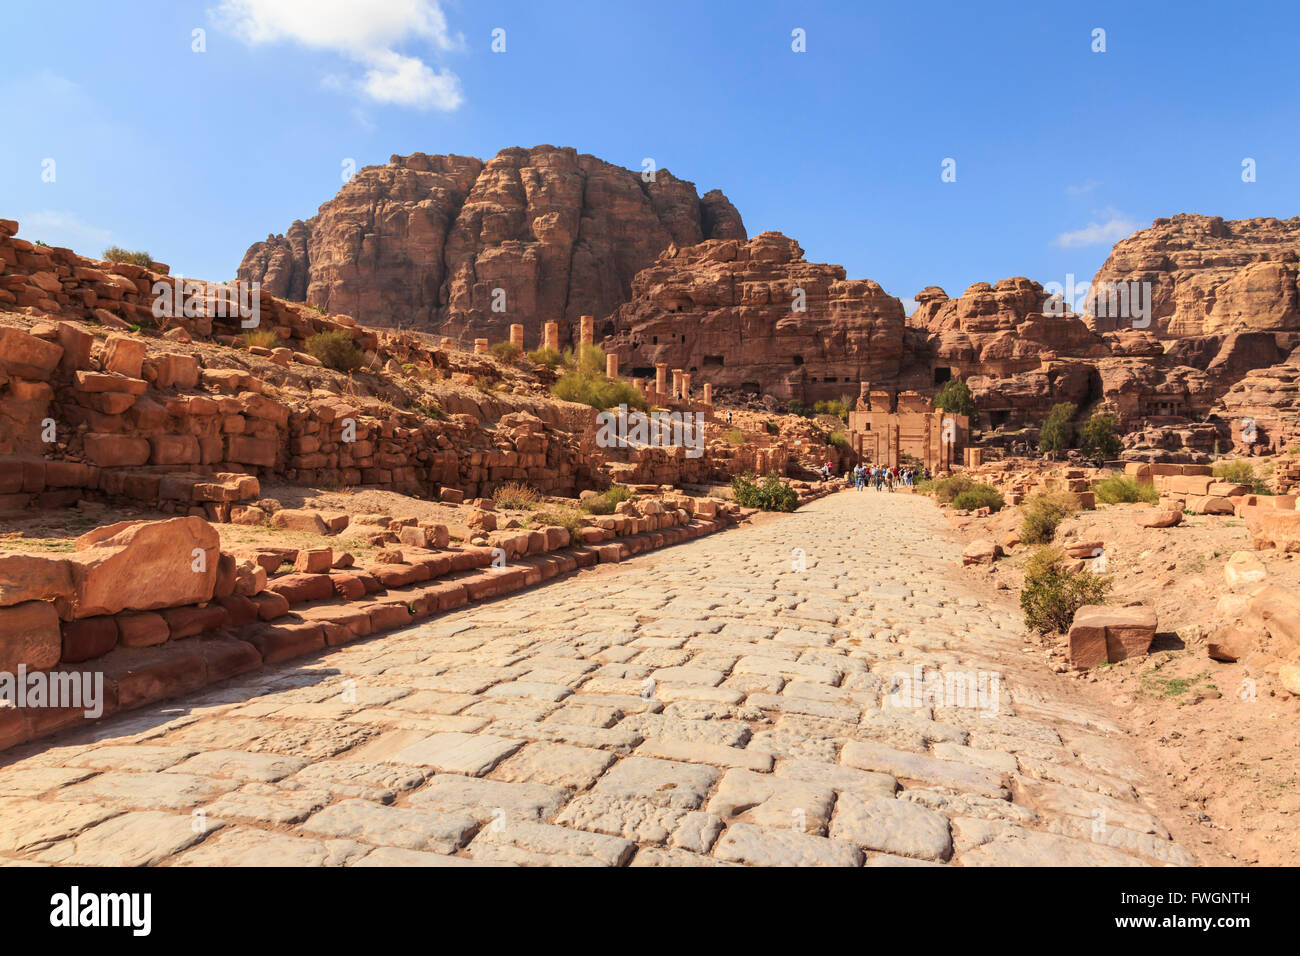 Colonnaded Street, City of Petra ruins, Petra, UNESCO World Heritage Site, Jordan, Middle East Stock Photo